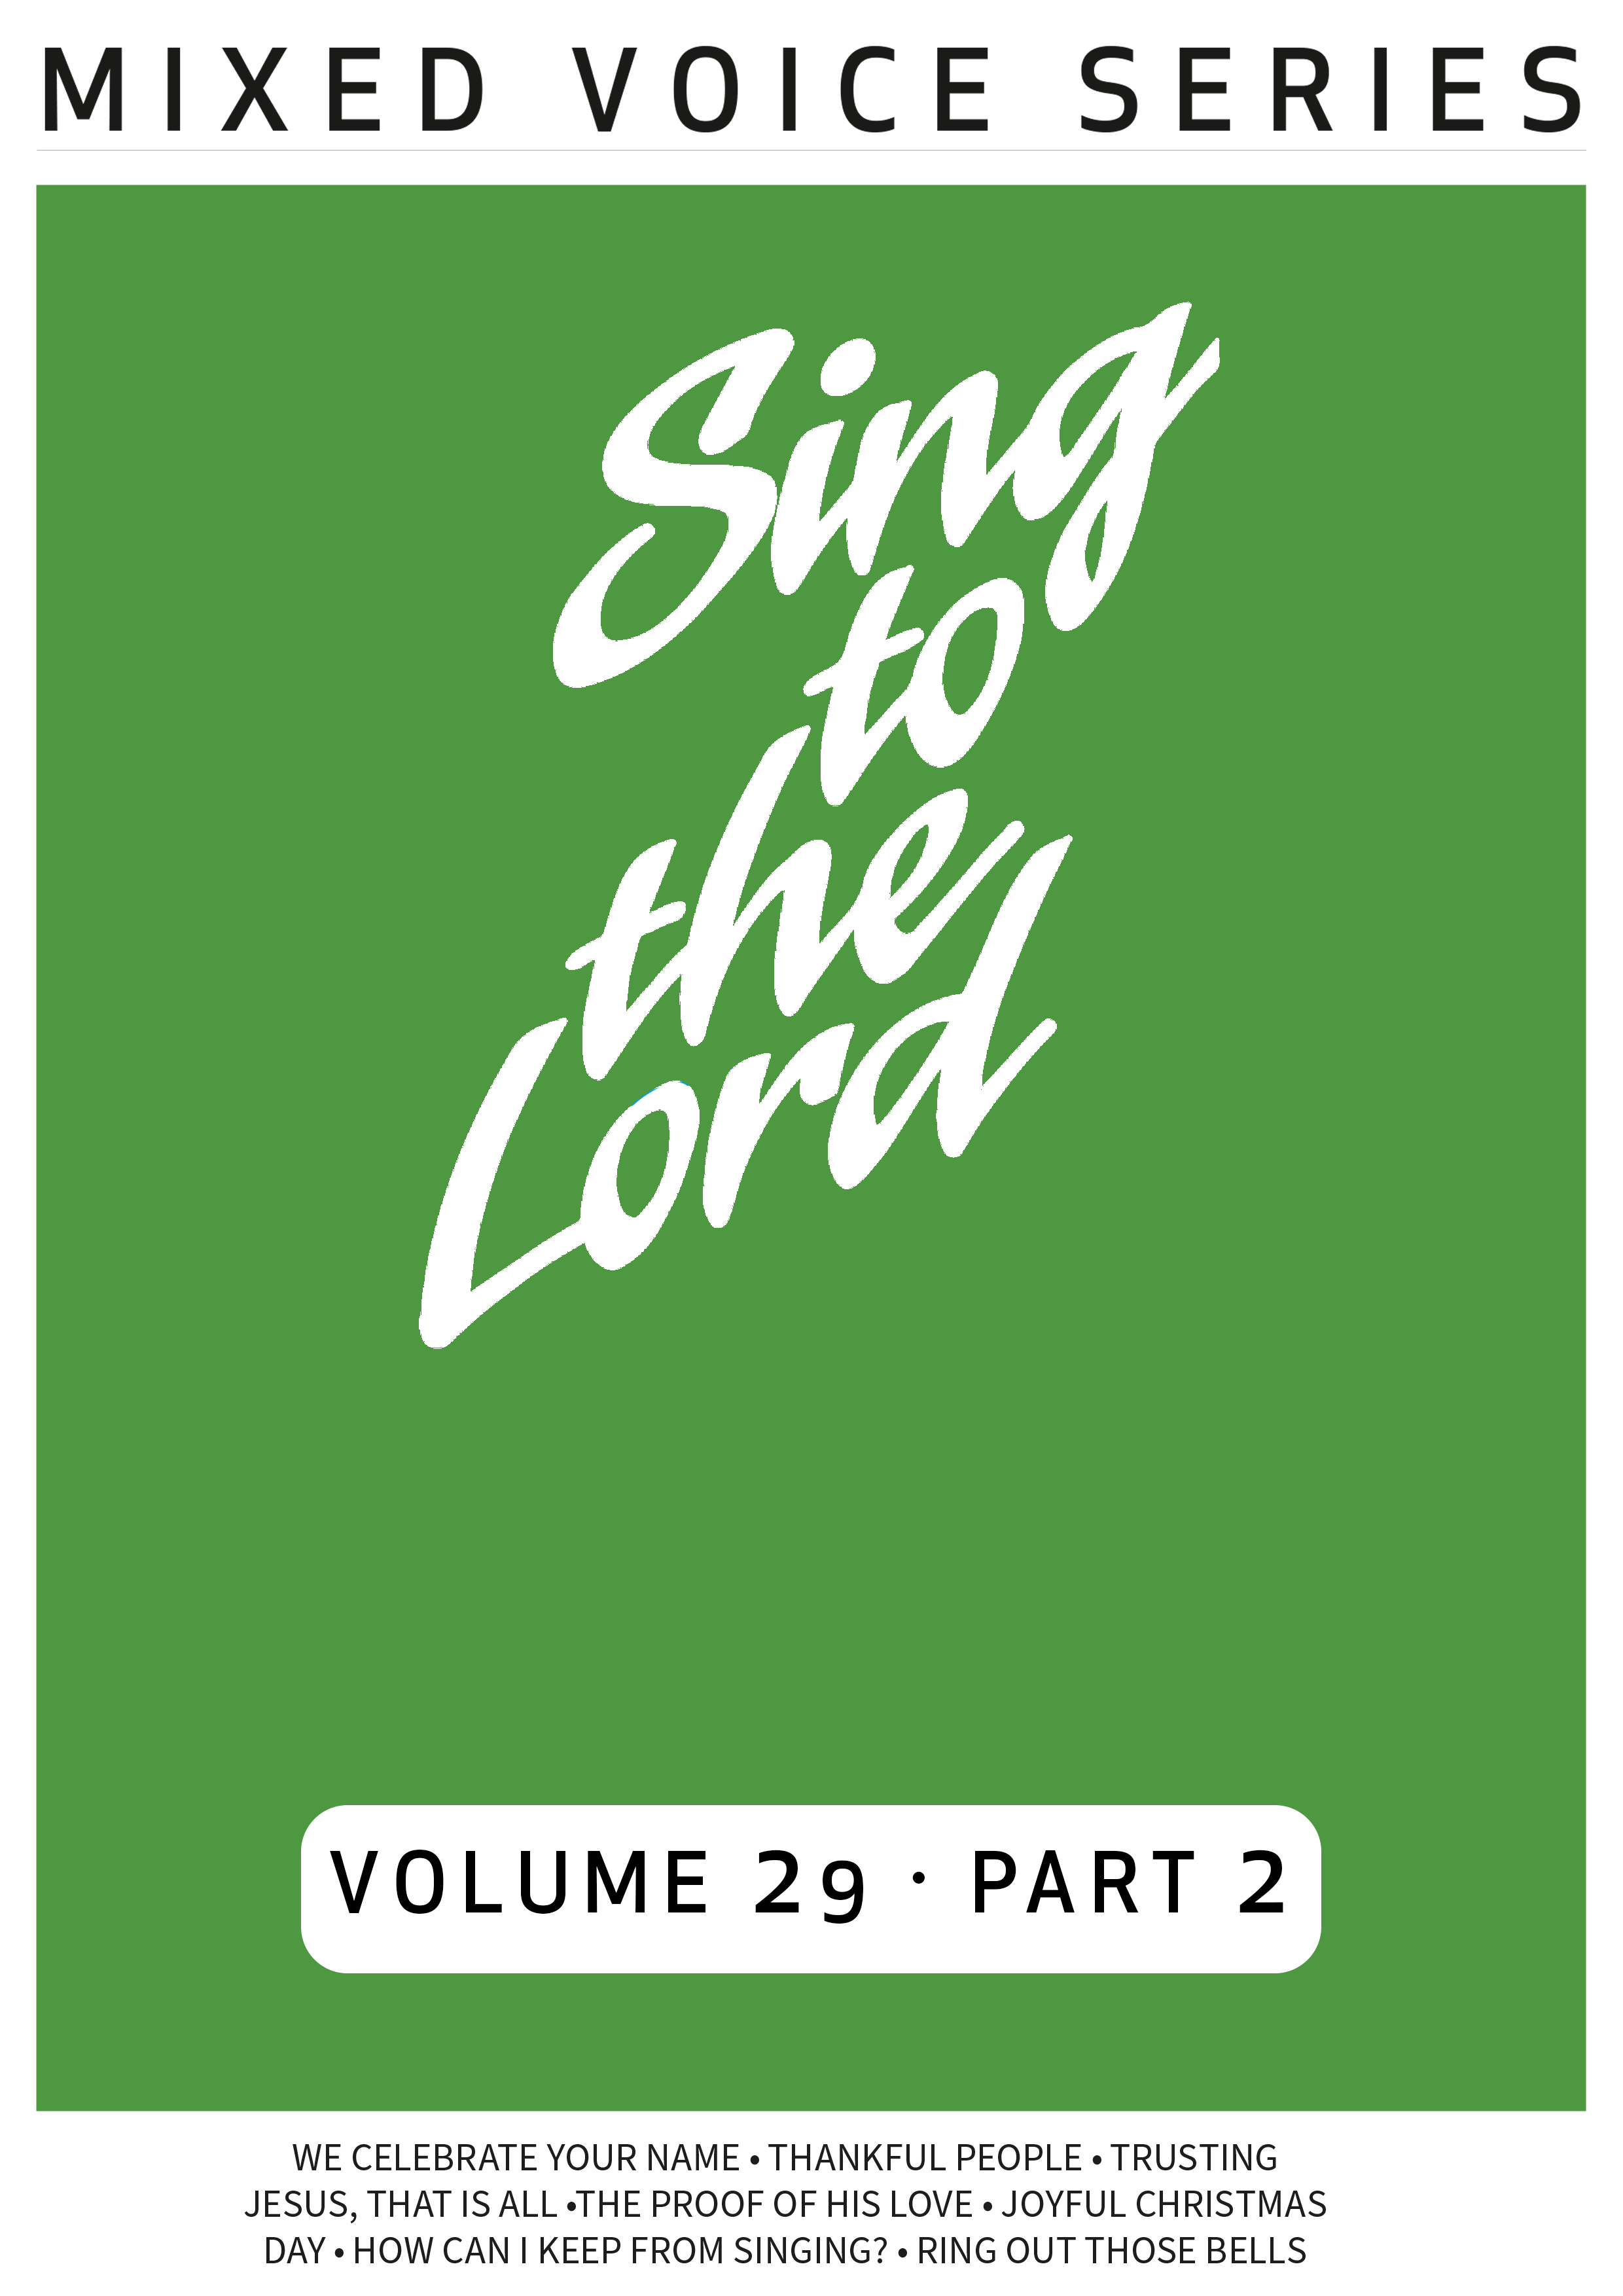 Sing to the Lord, Mixed Voice Series, Volume 29 Part 2